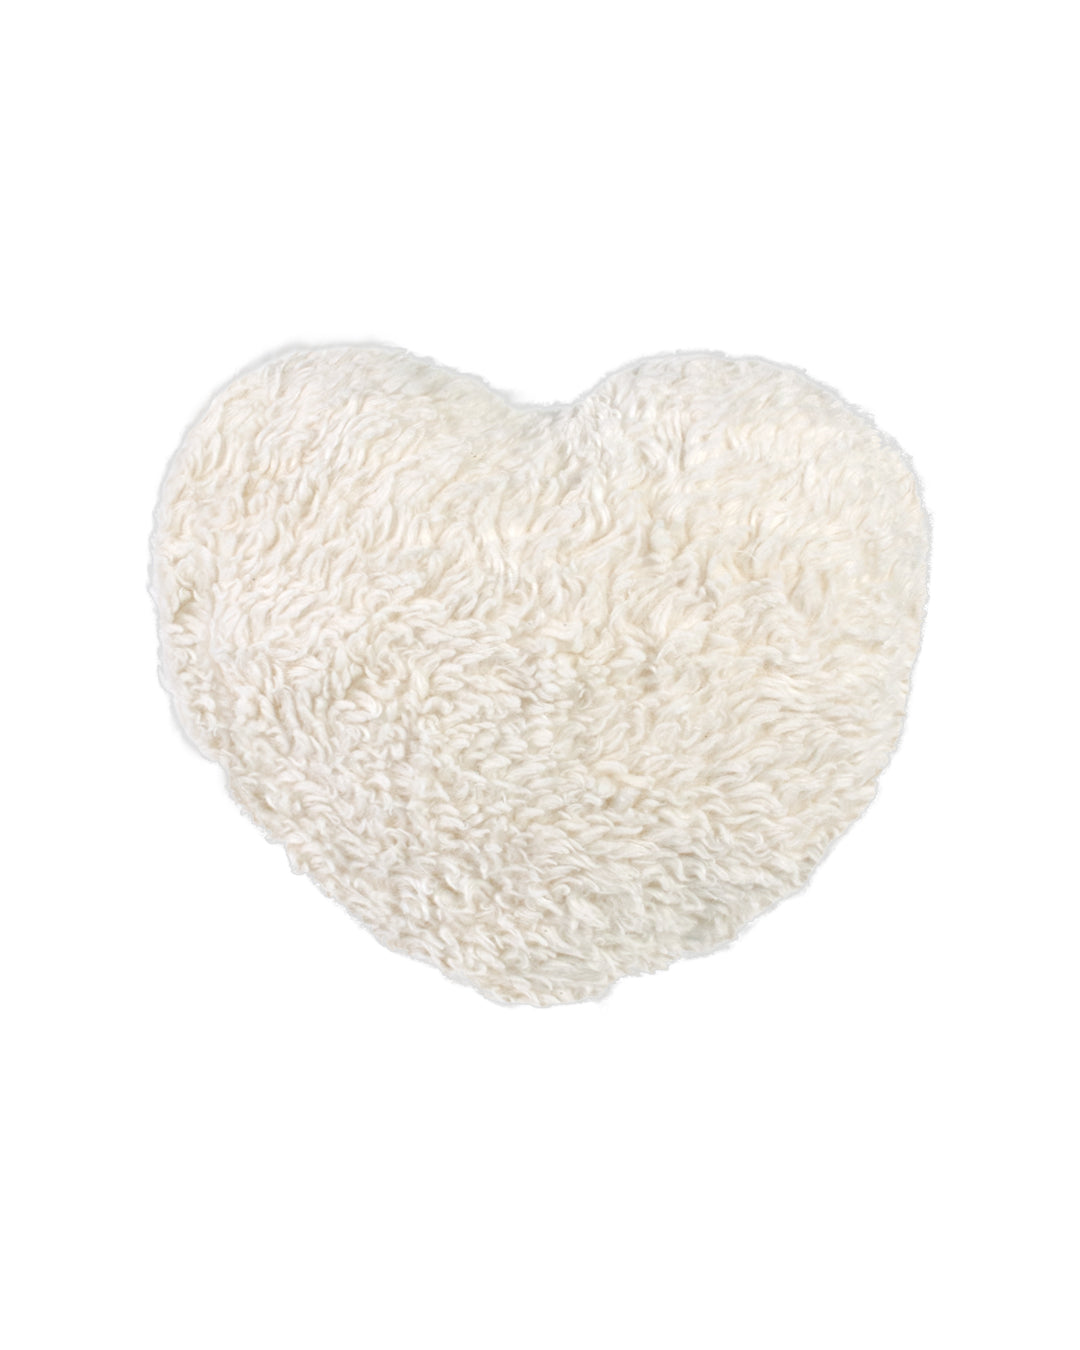 Back of Eco-friendly dog toy shaped like an avocado that’s in the shape of a heart. Made with durable canvas and plush cotton sherpa. All materials are non-toxic and vegan-friendly. 